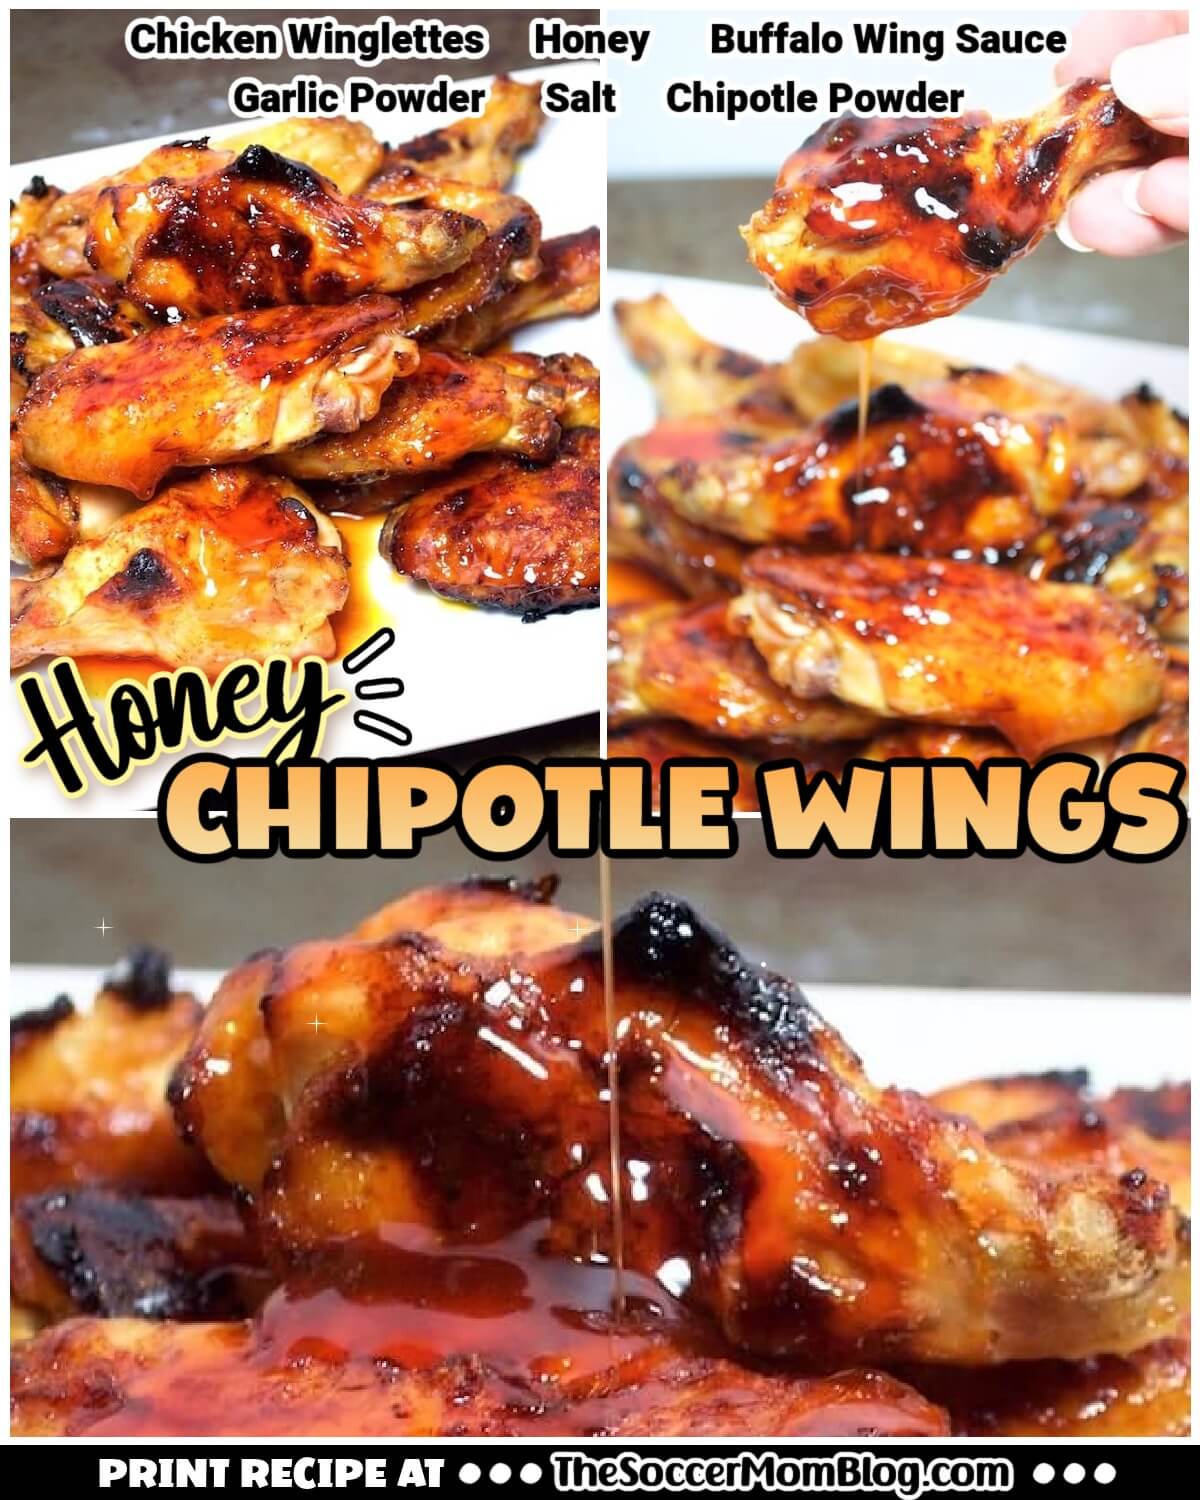 3 photo collage with text overlay "Honey Chipotle Wings"